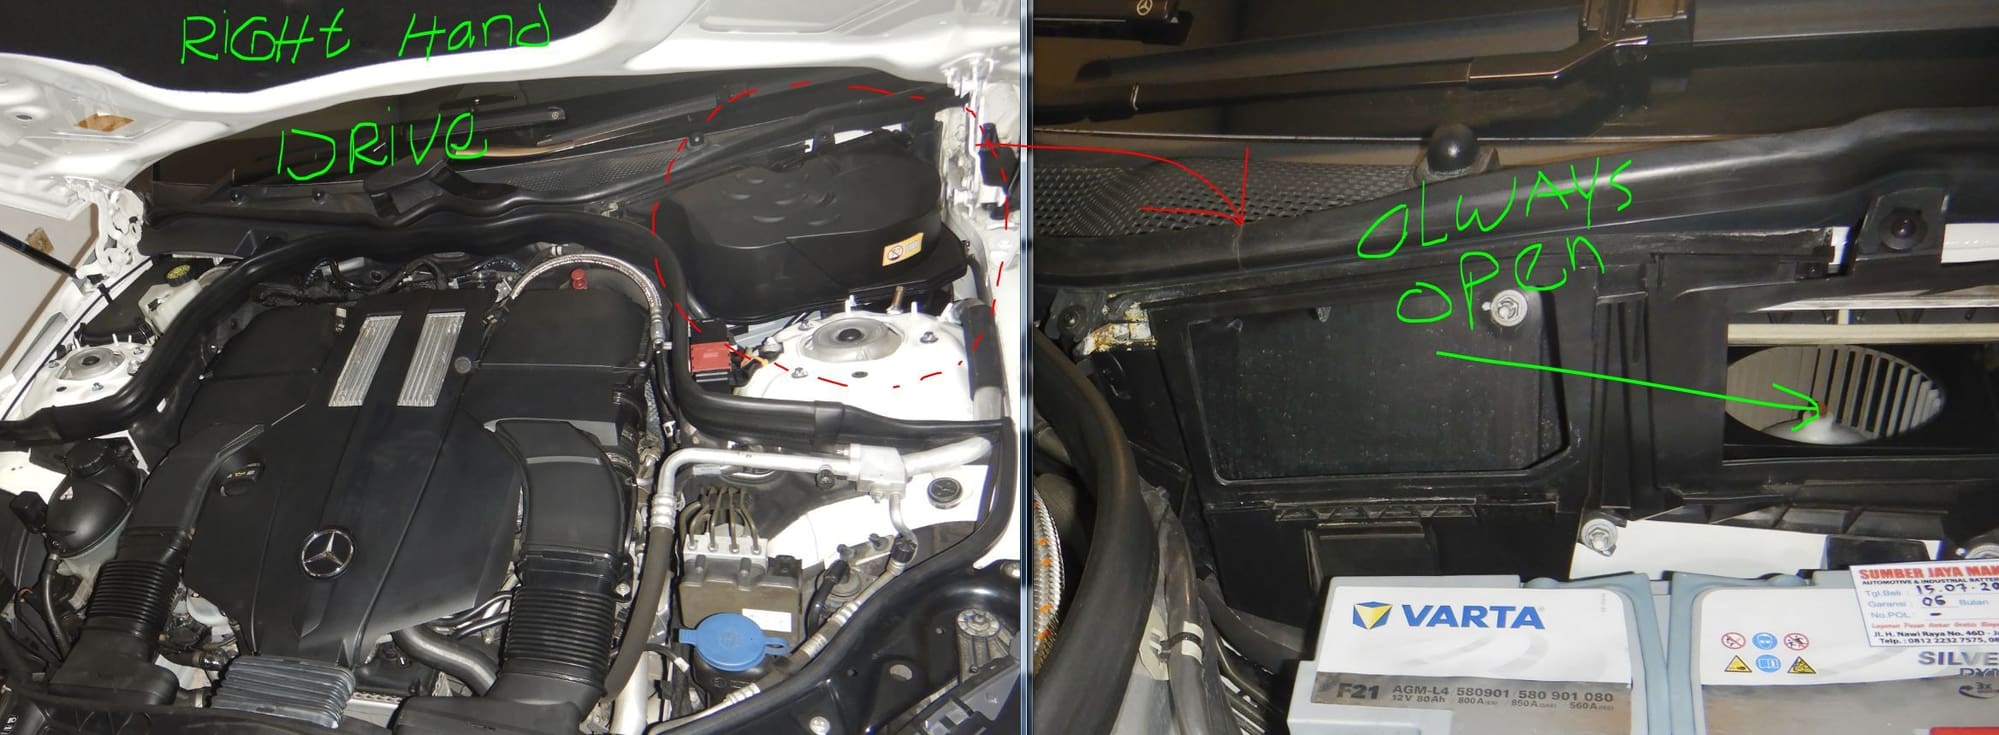 secondary air system not ready mercedes